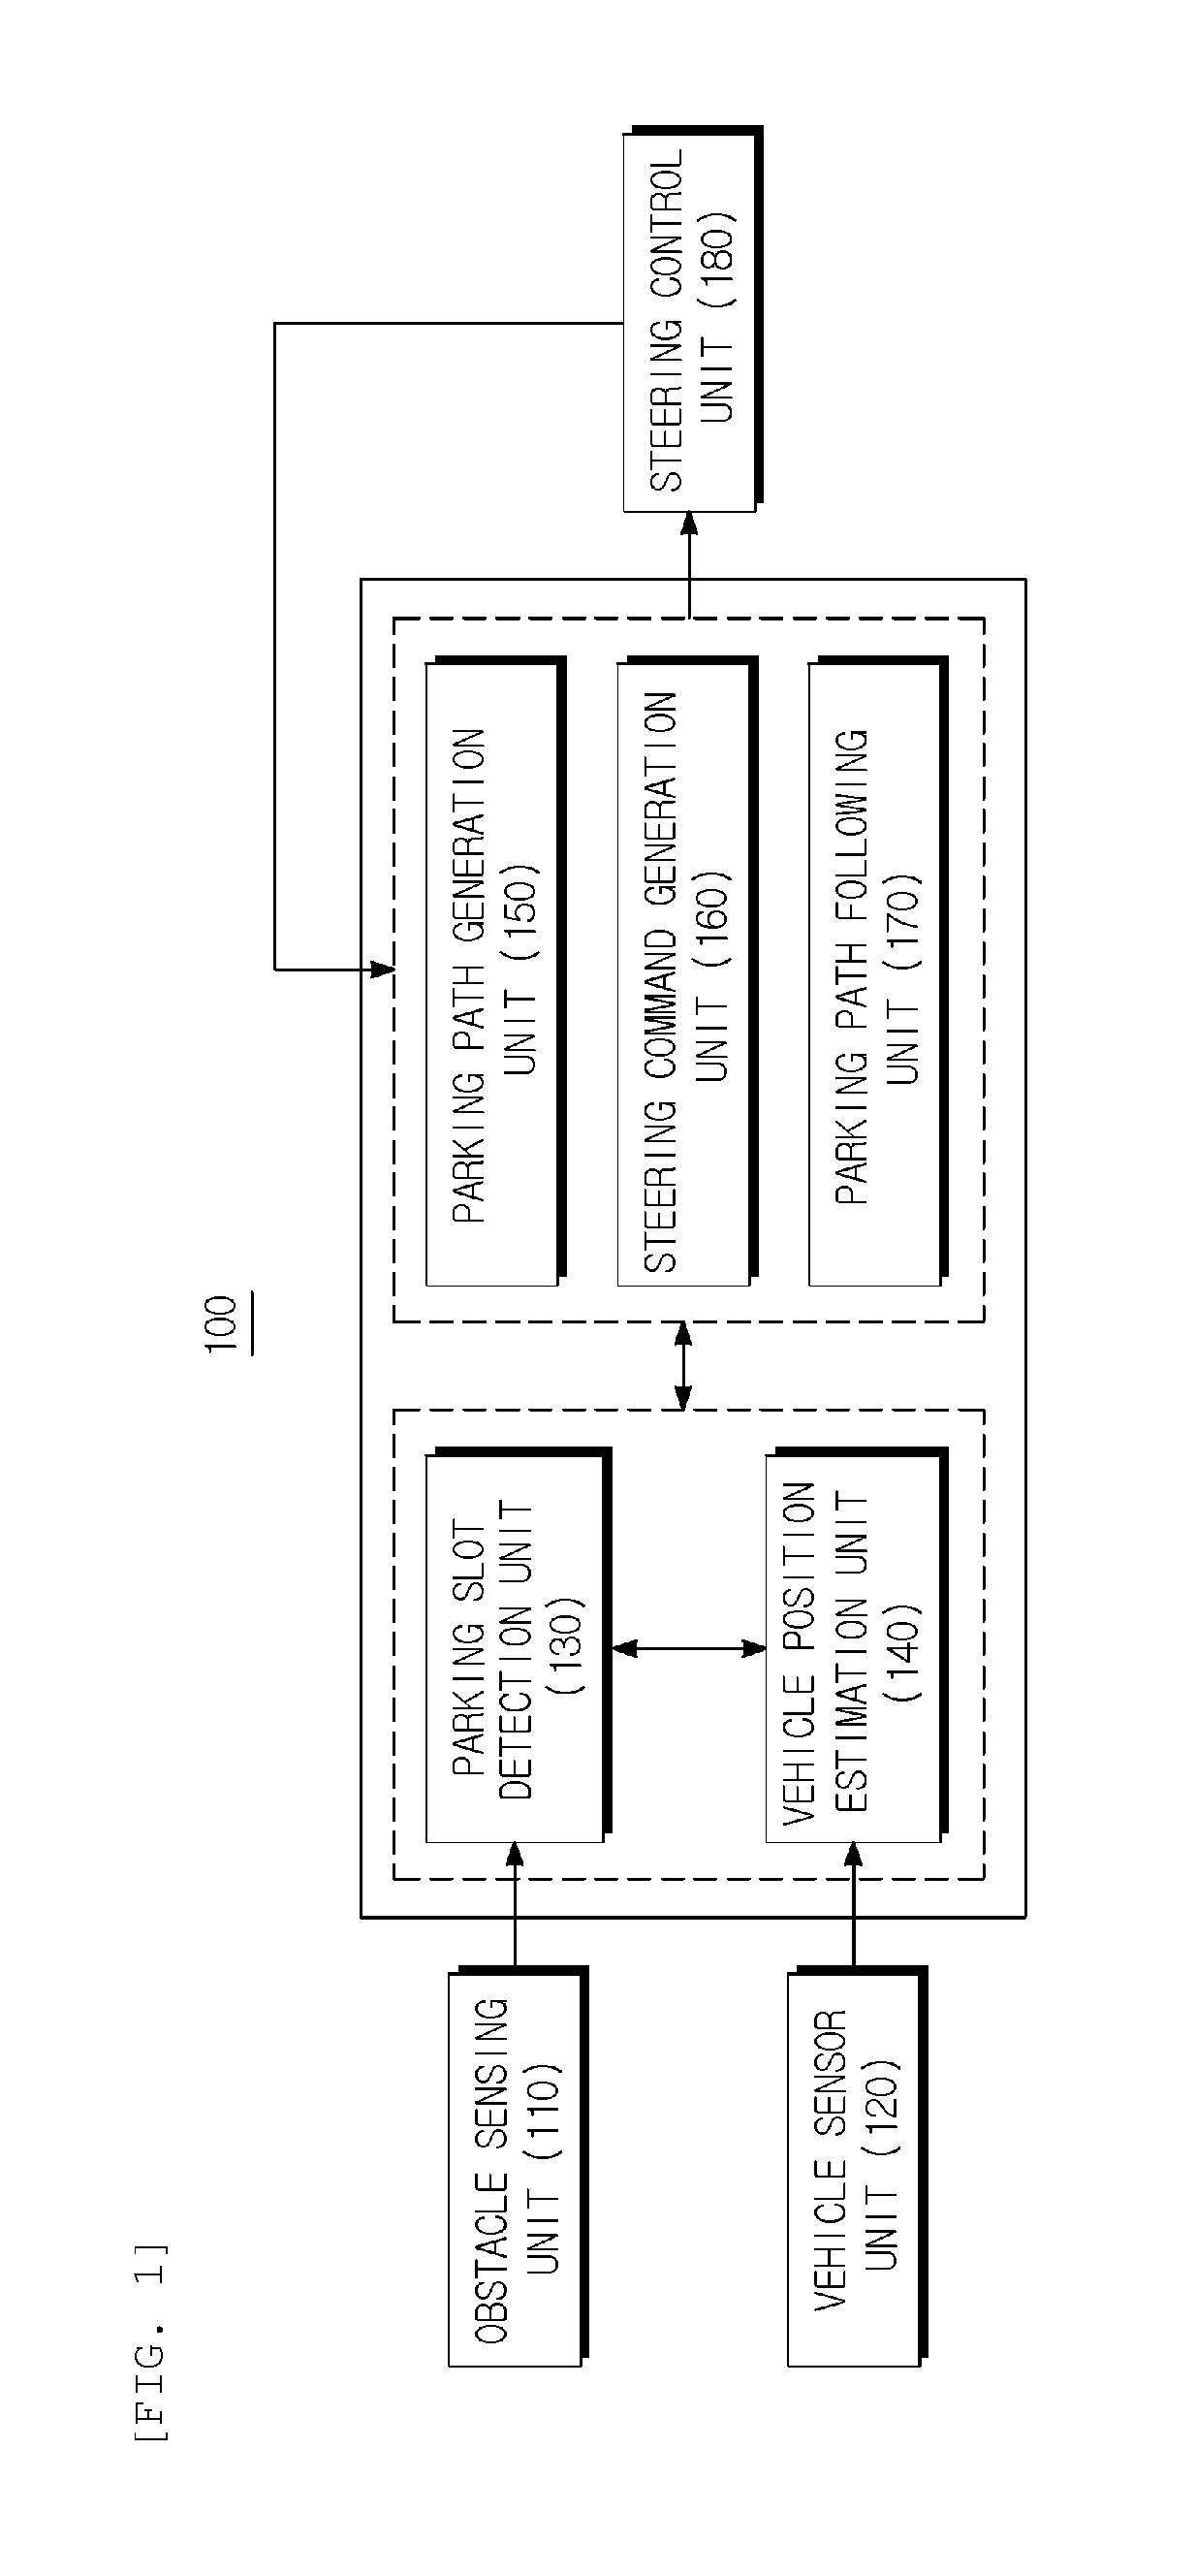 Apparatus and method for controlling head-in perpendicular parking of vehicle, and system for head-in perpendicular parking of vehicle with the apparatus